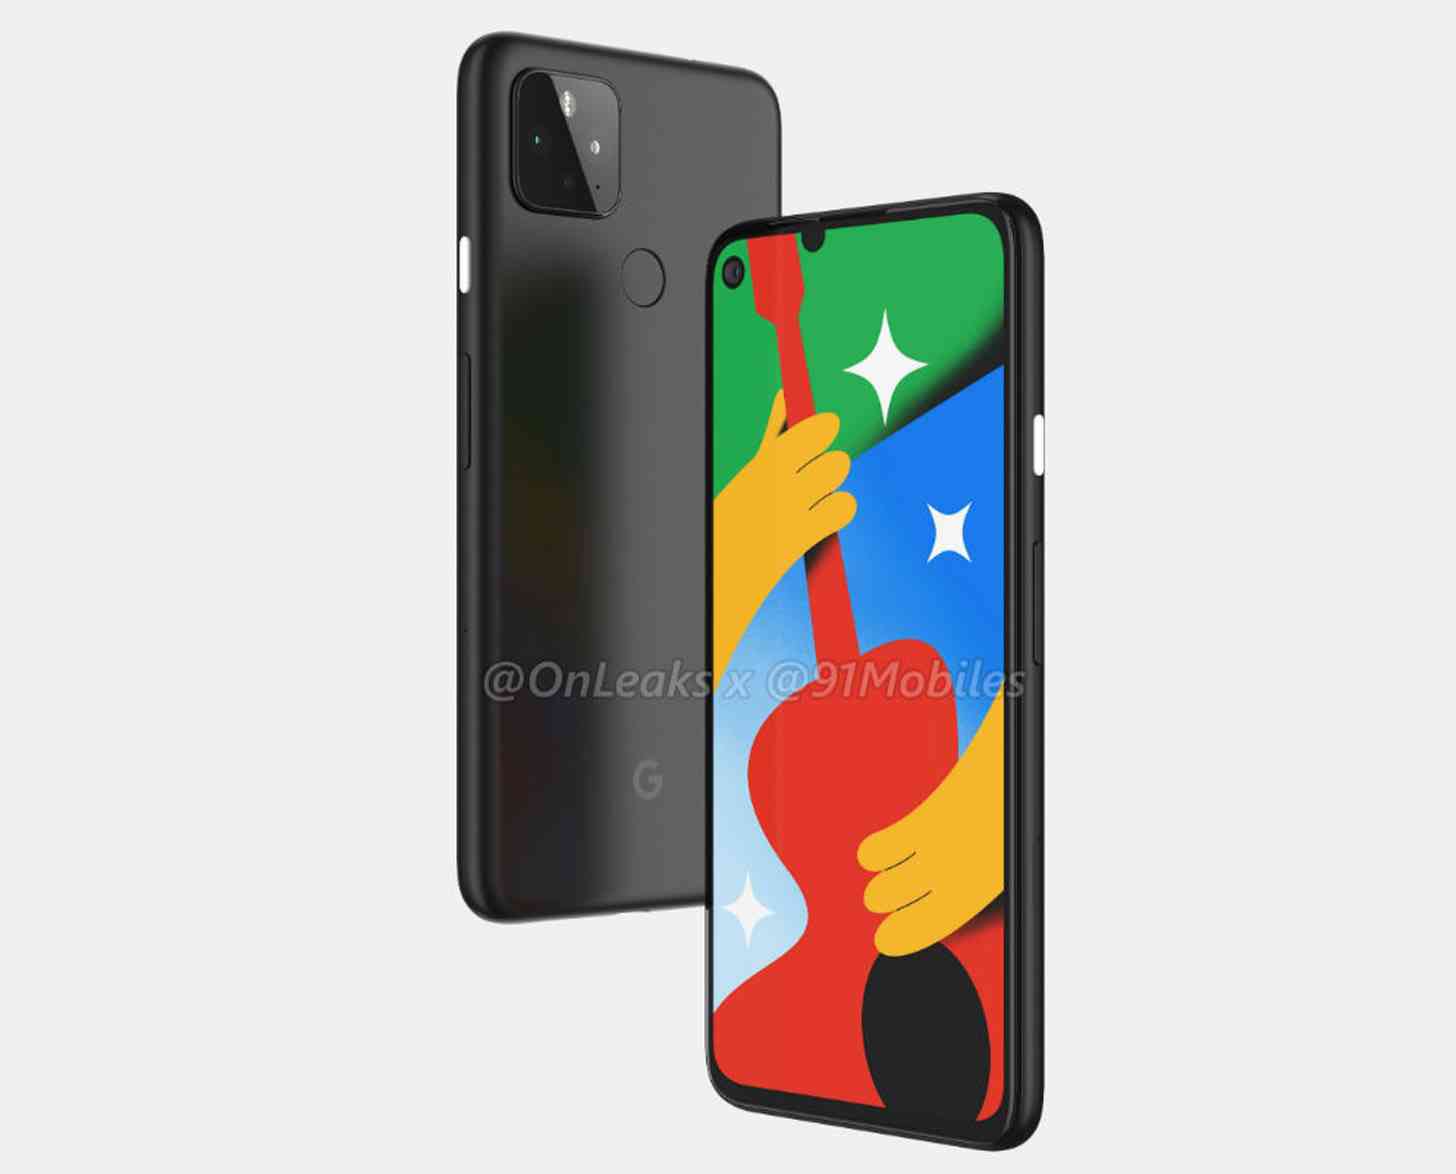 Pixel 4a 5G renders front, back